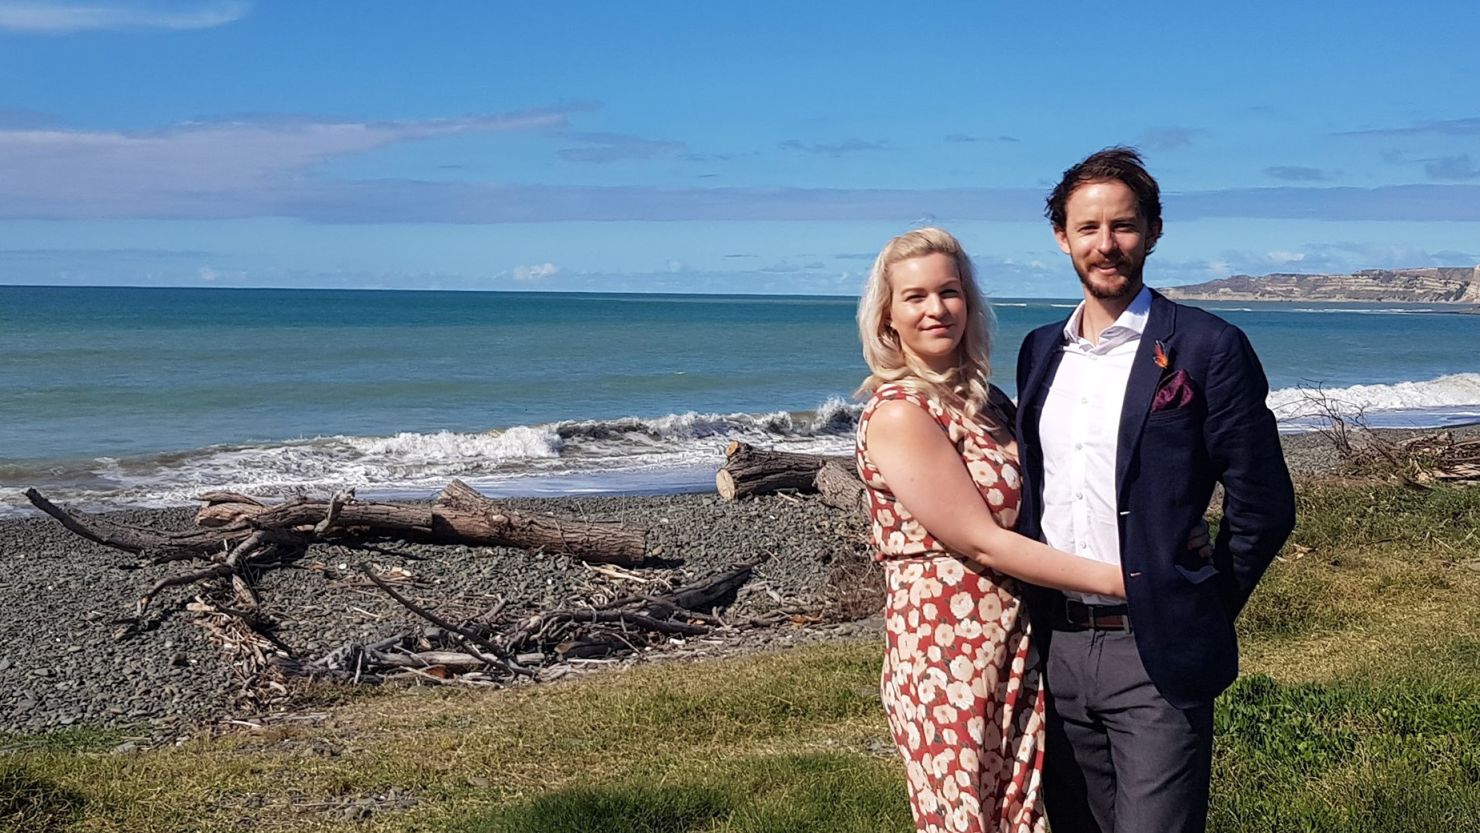 Samantha Hannah was living in New Zealand when she matched on a dating app with Toby Hunter, who was in London. Here's the couple in Hawkes Bay, New Zealand.